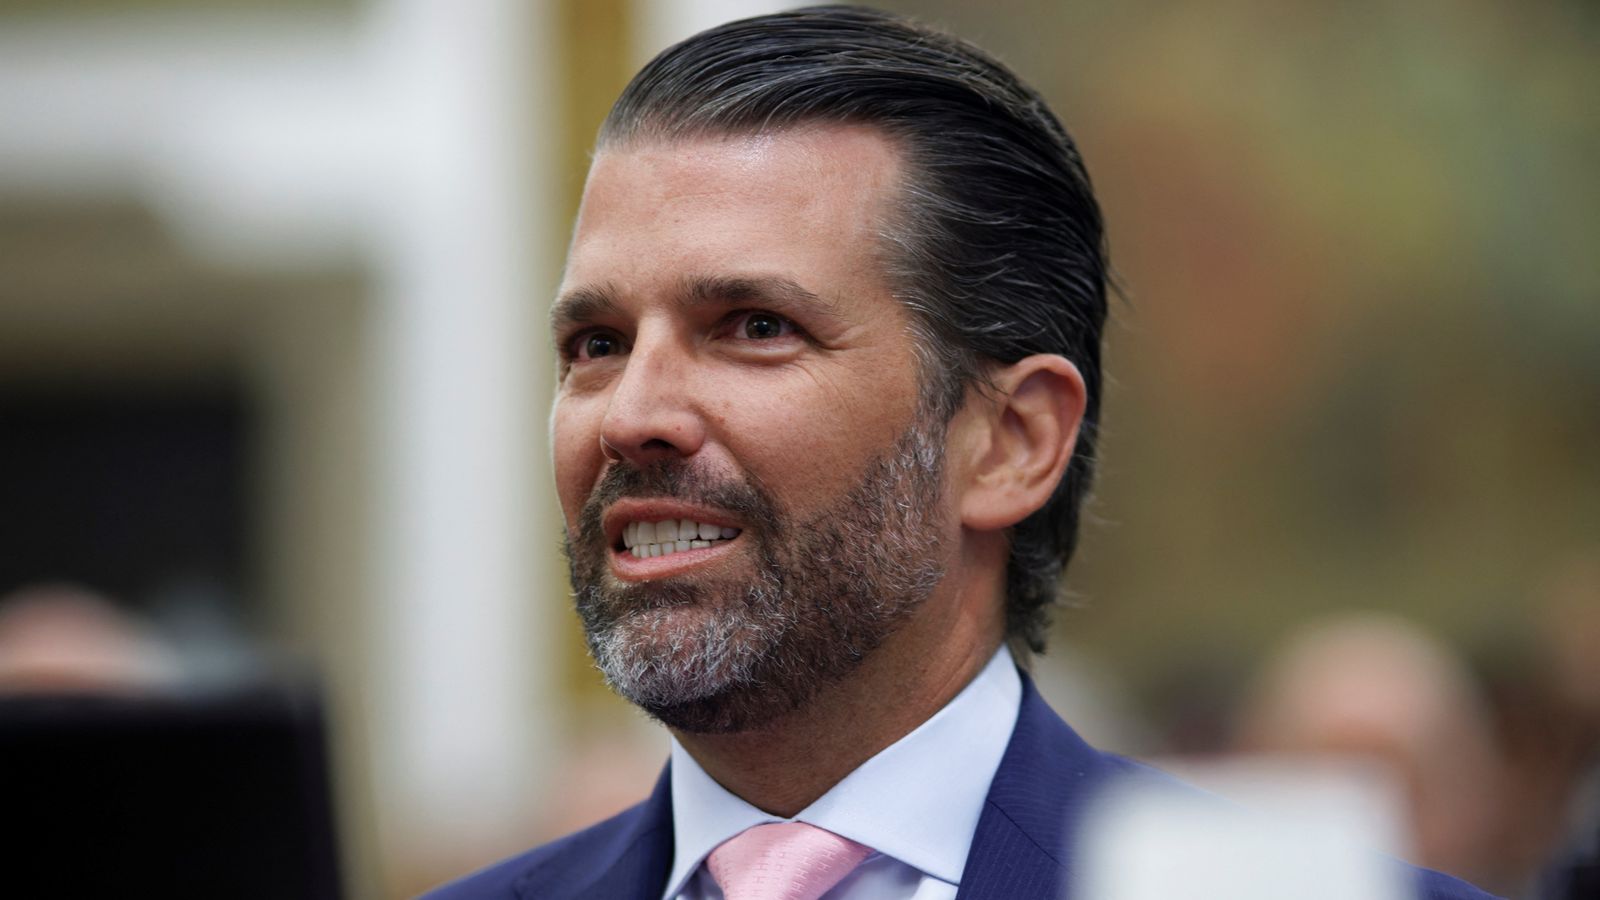 Donald Trump Jr receives demise menace and unidentified white powder in envelope at Florida house